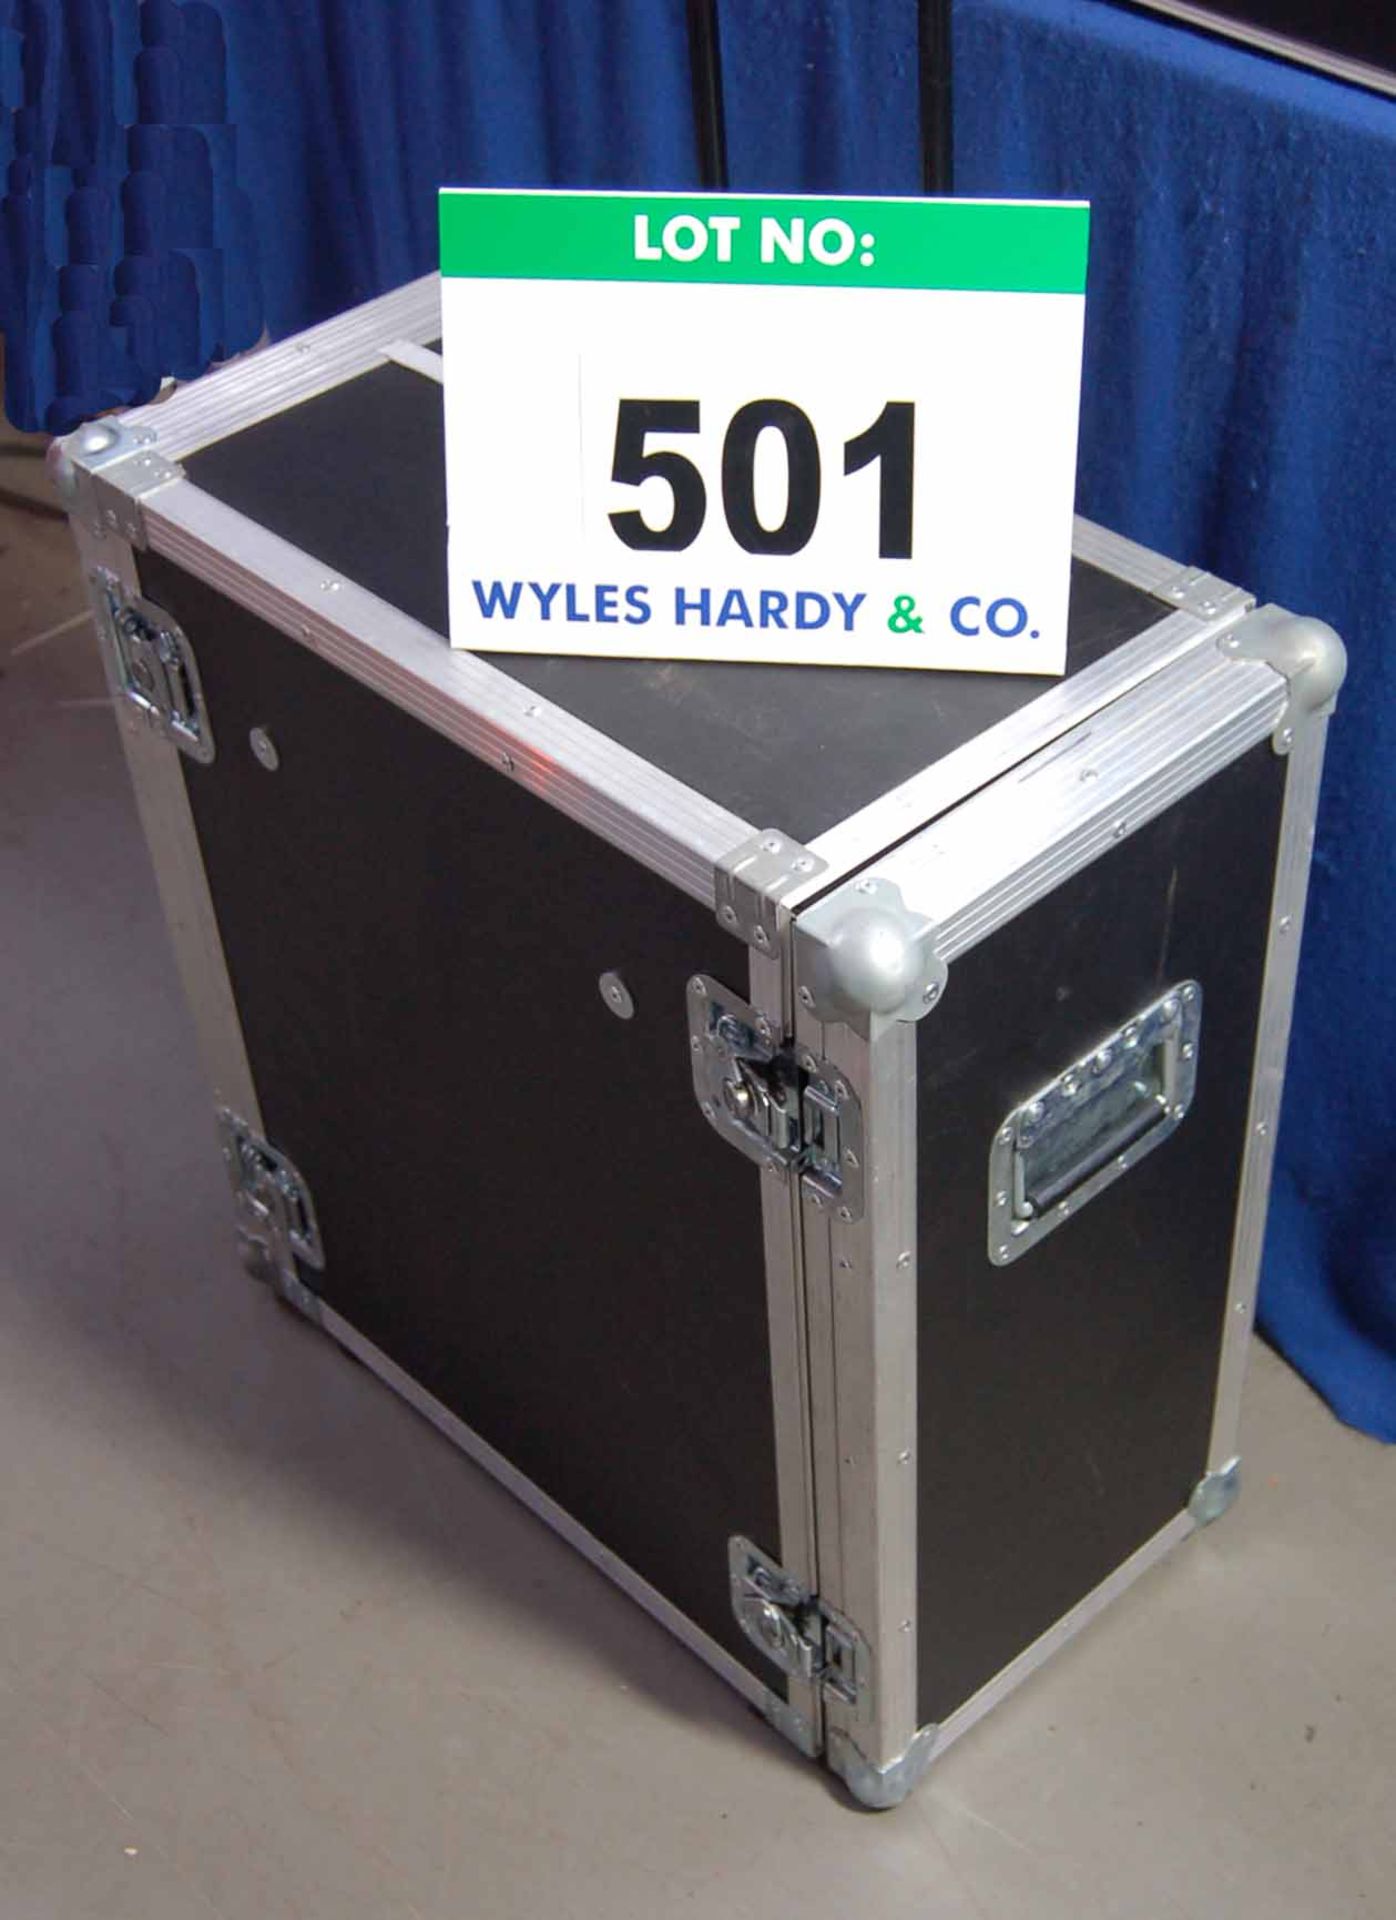 An ELCOM Flight Case Approx. 25 inch x 13 inch x 27 inch externally mounted on Two Wheels